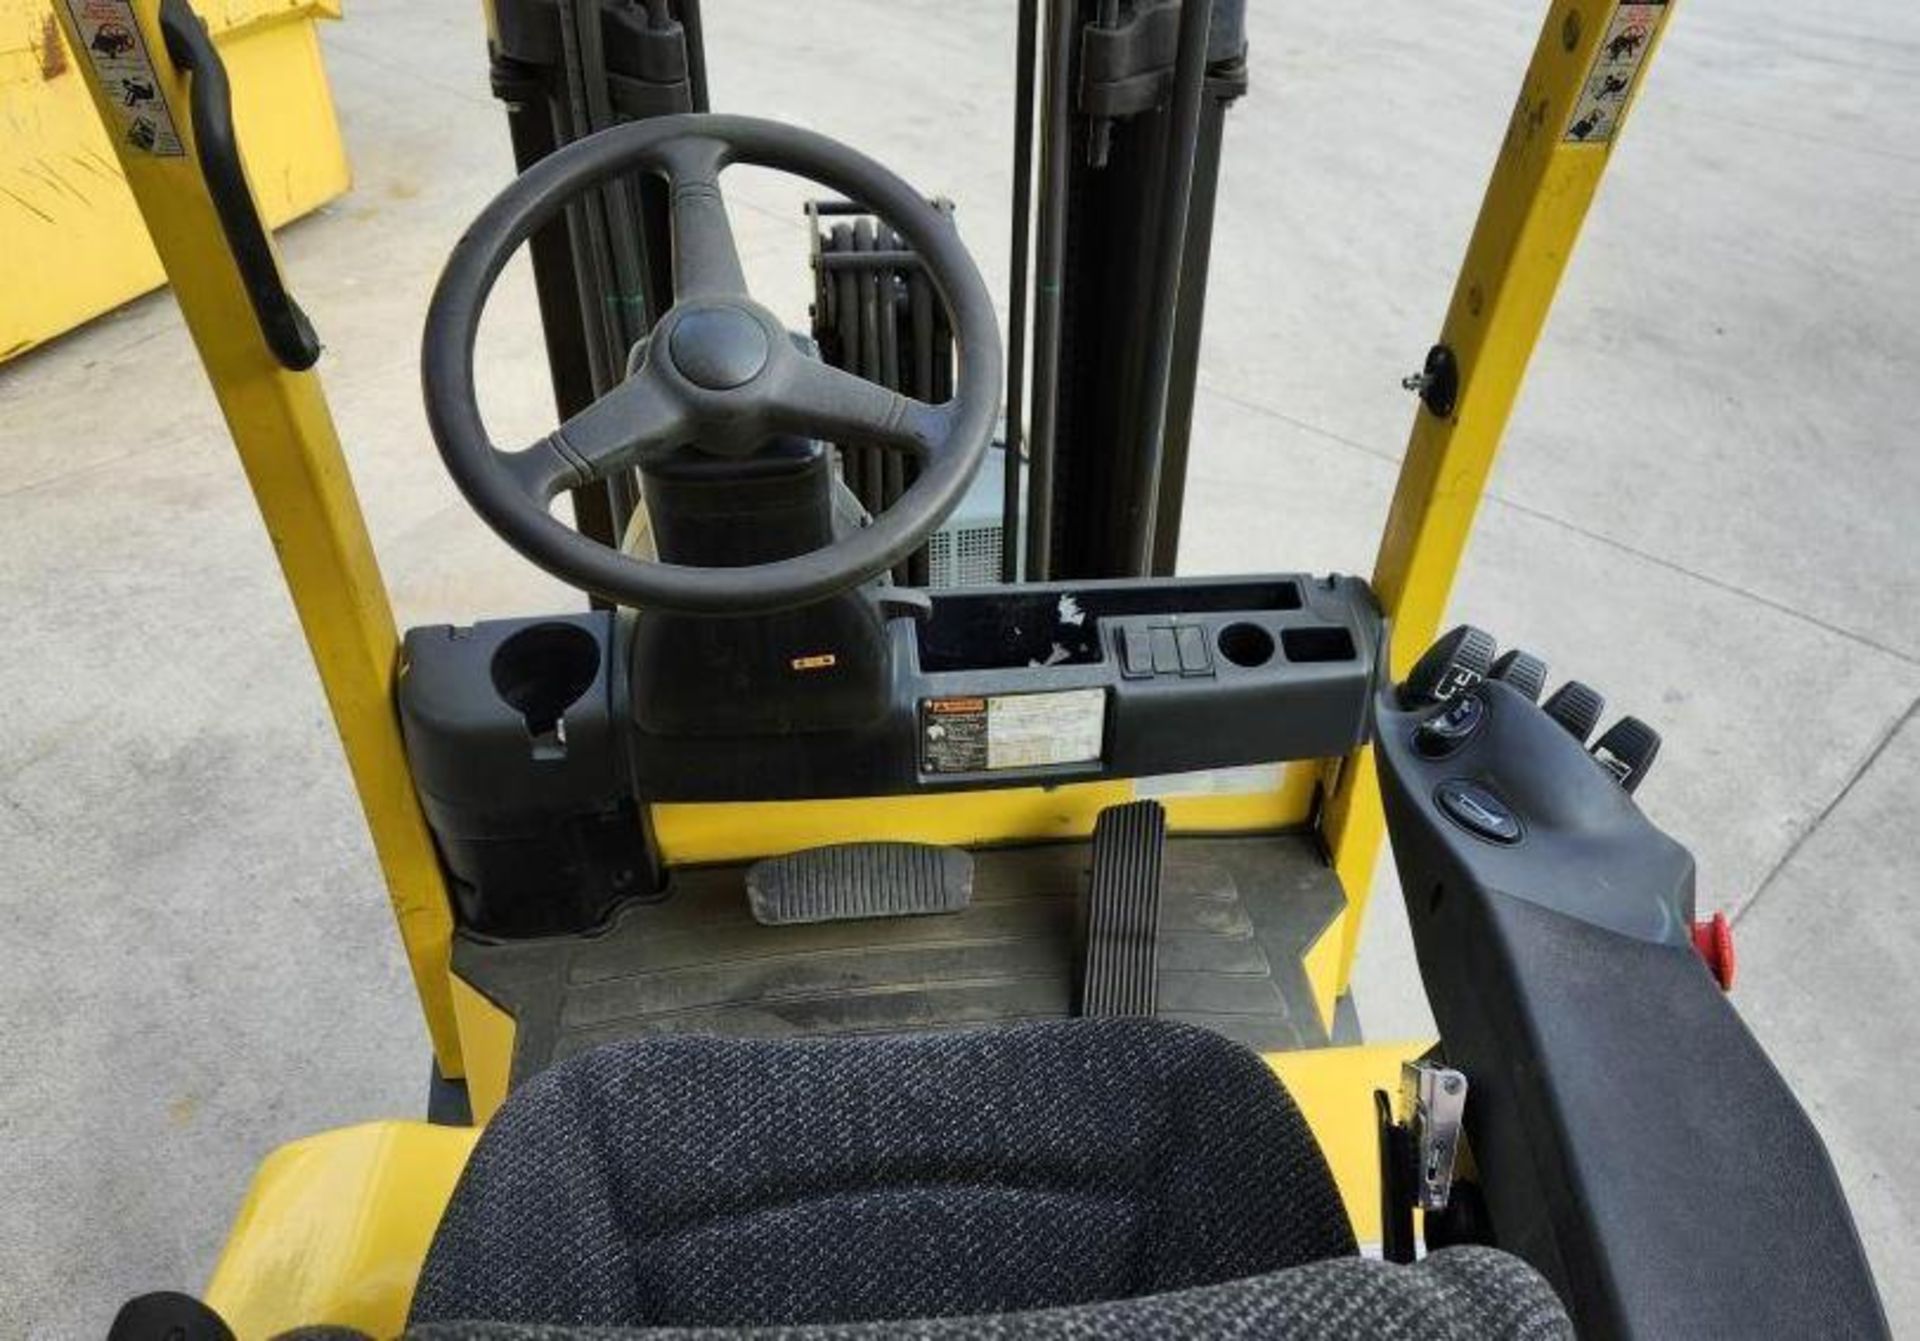 2013 Hyster E45XN-33 Electric Forklift - Image 6 of 7